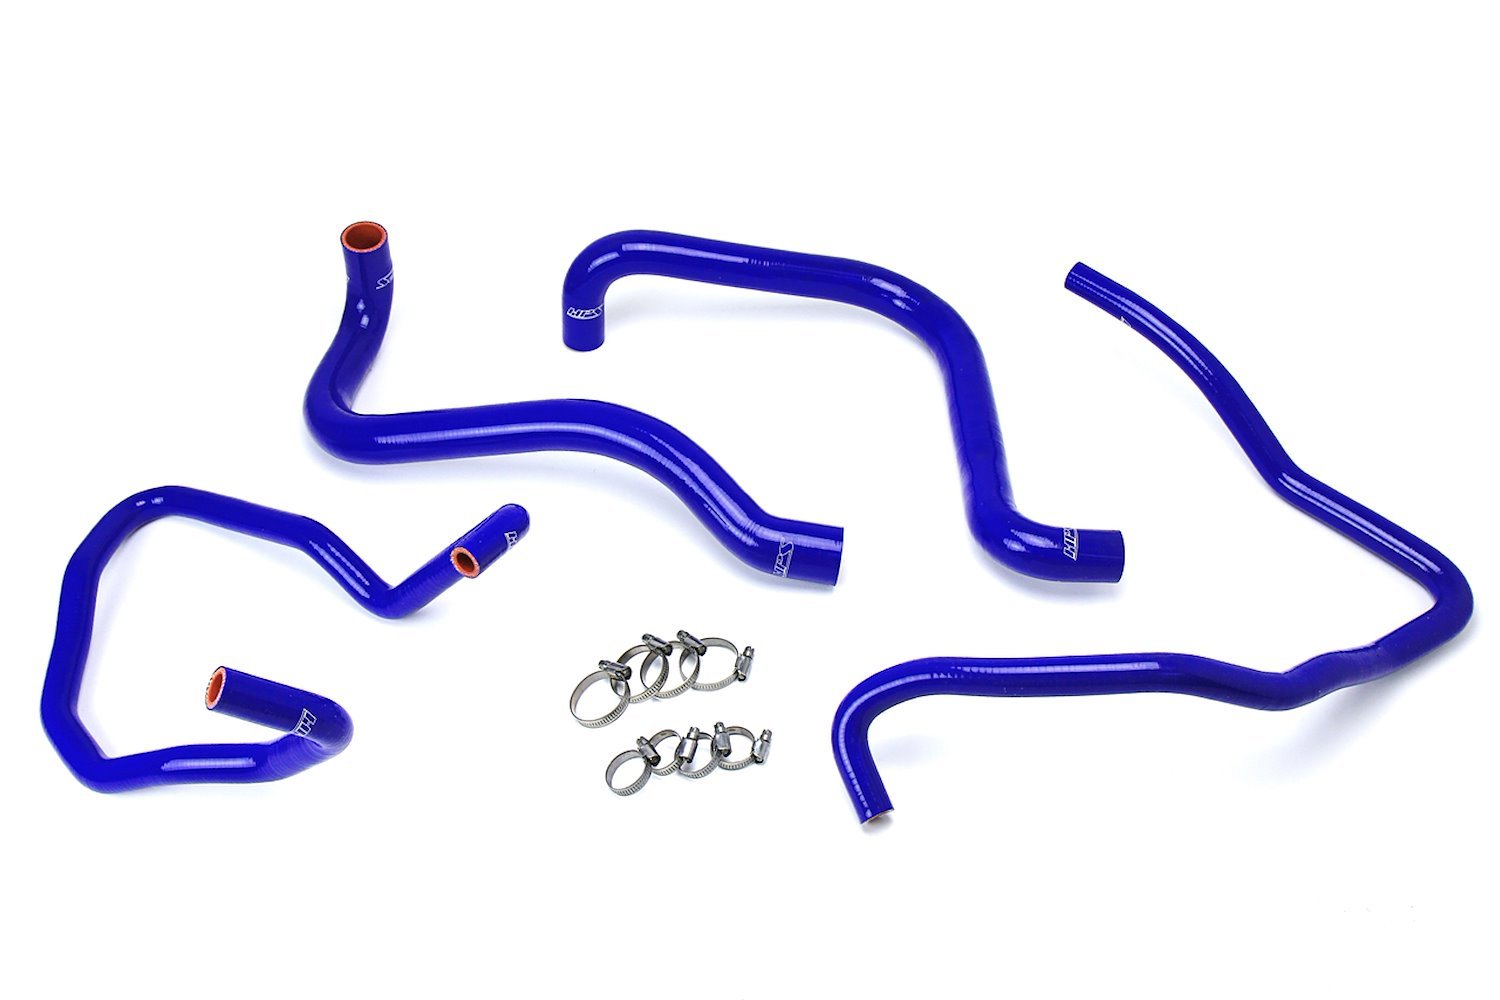 57-1589-BLUE Coolant Hose Kit, High-Temp 3-Ply Reinforced Silicone, Replace Rubber Radiator Heater Coolant Hoses